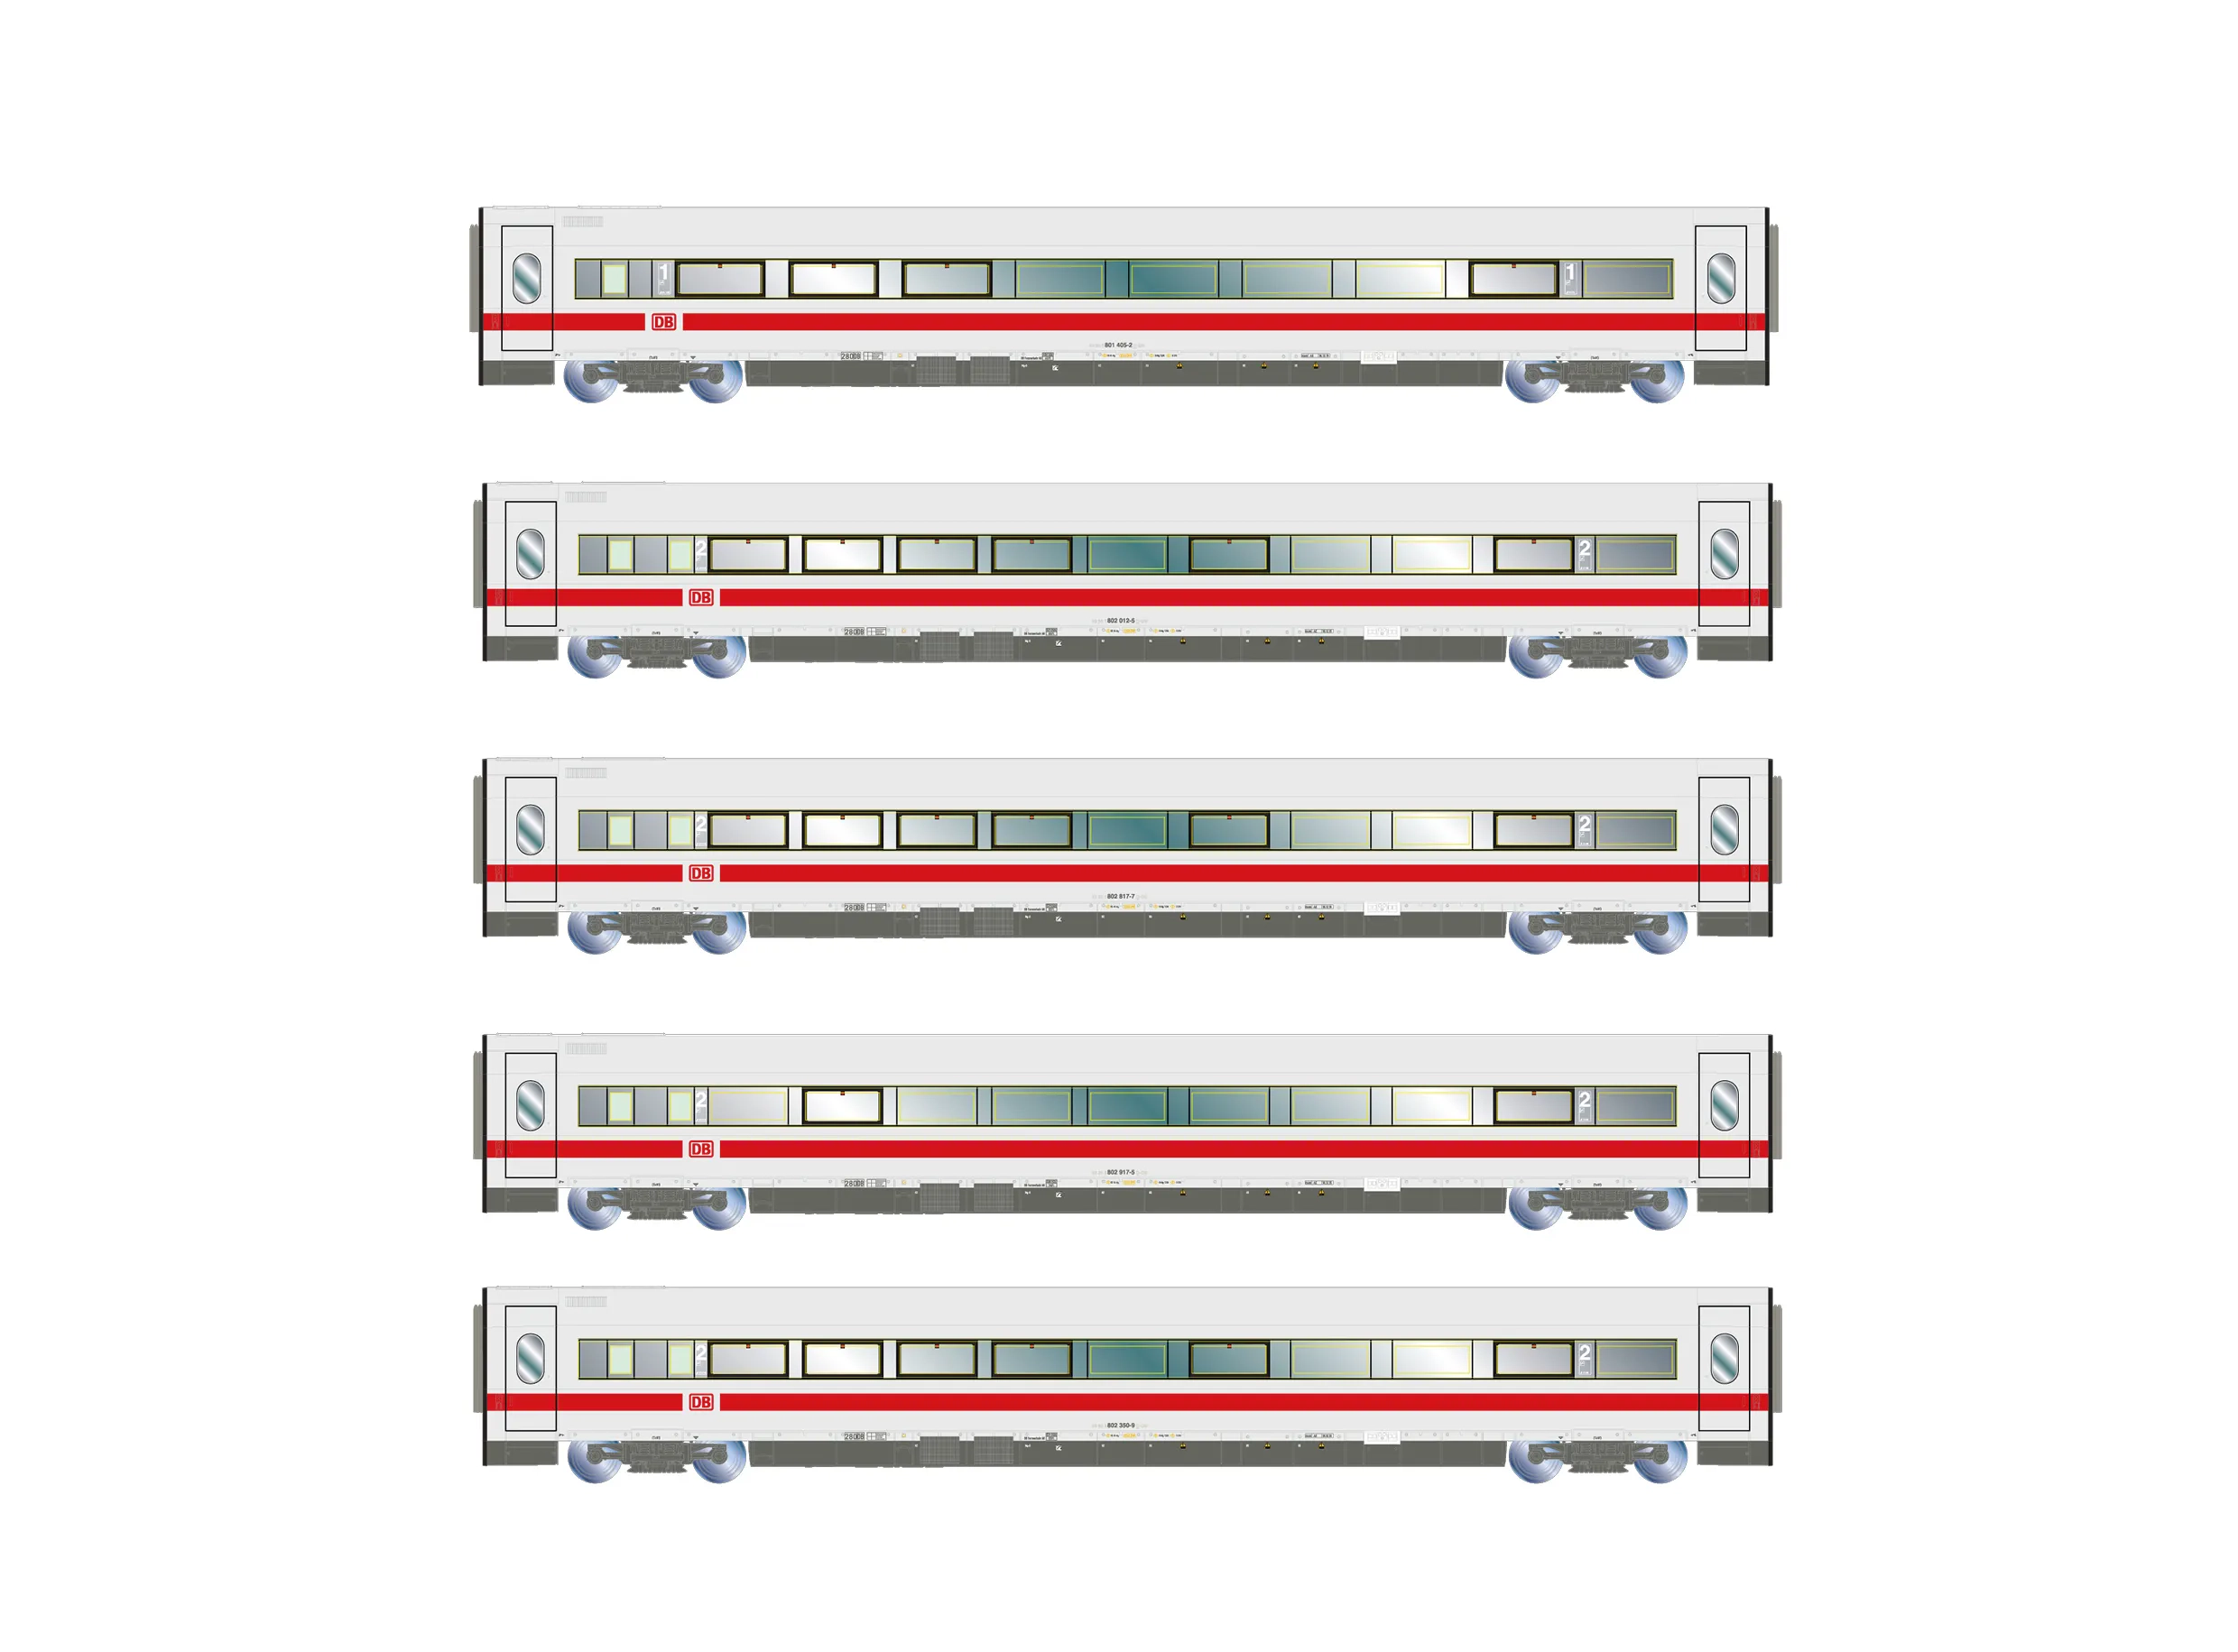 DB AG, 5-unit pack add. coaches for ICE-1 (1 x 1st class + 4 x 2nd class) train "Interlaken", ep. VI